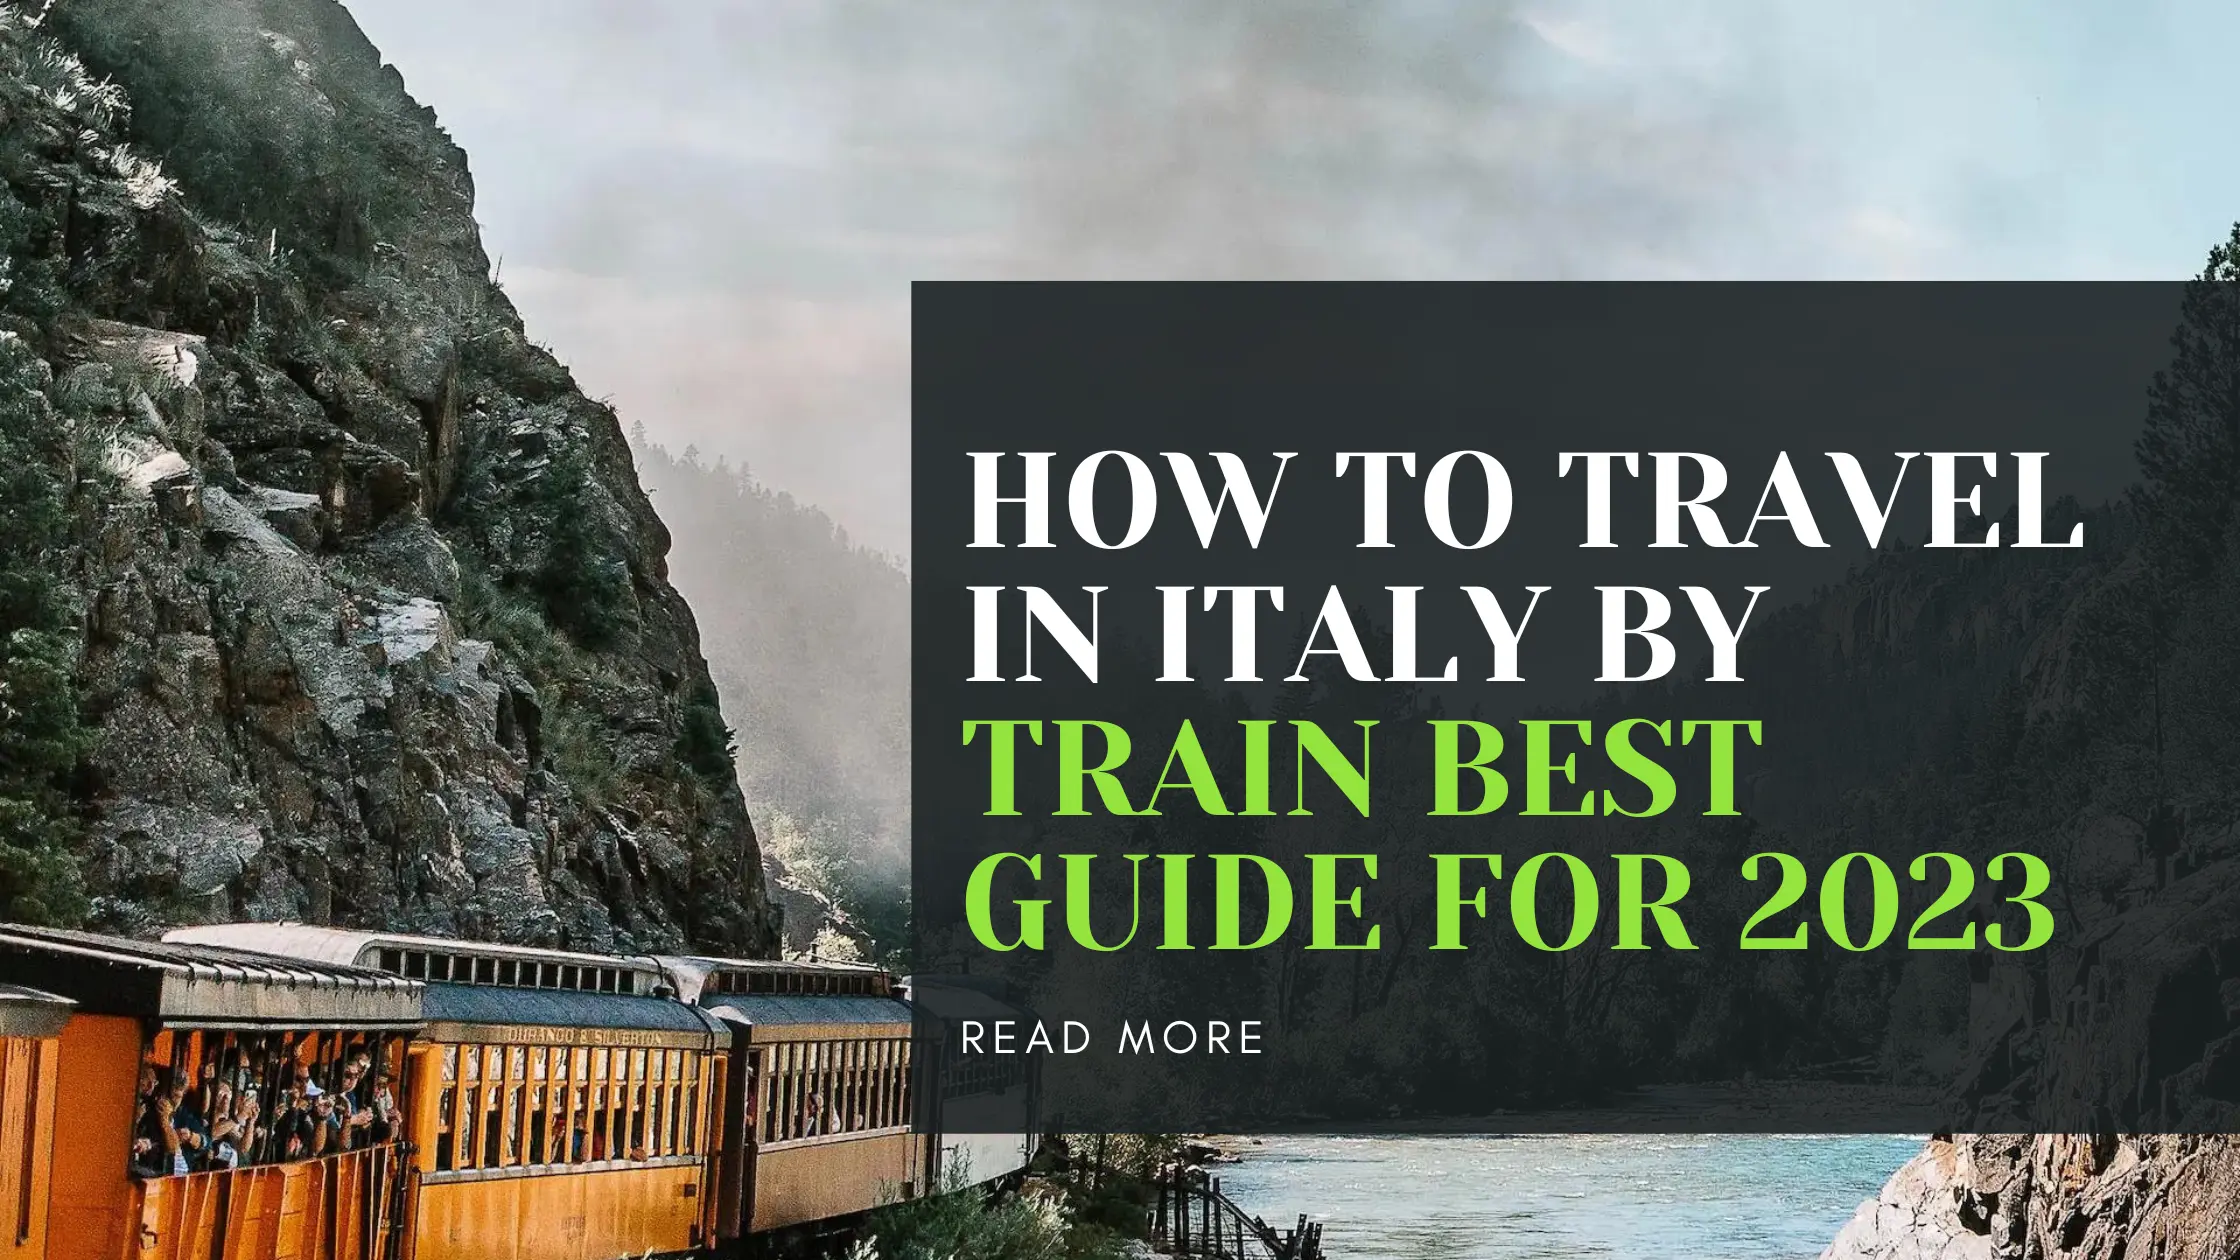 Travel in Italy by Train